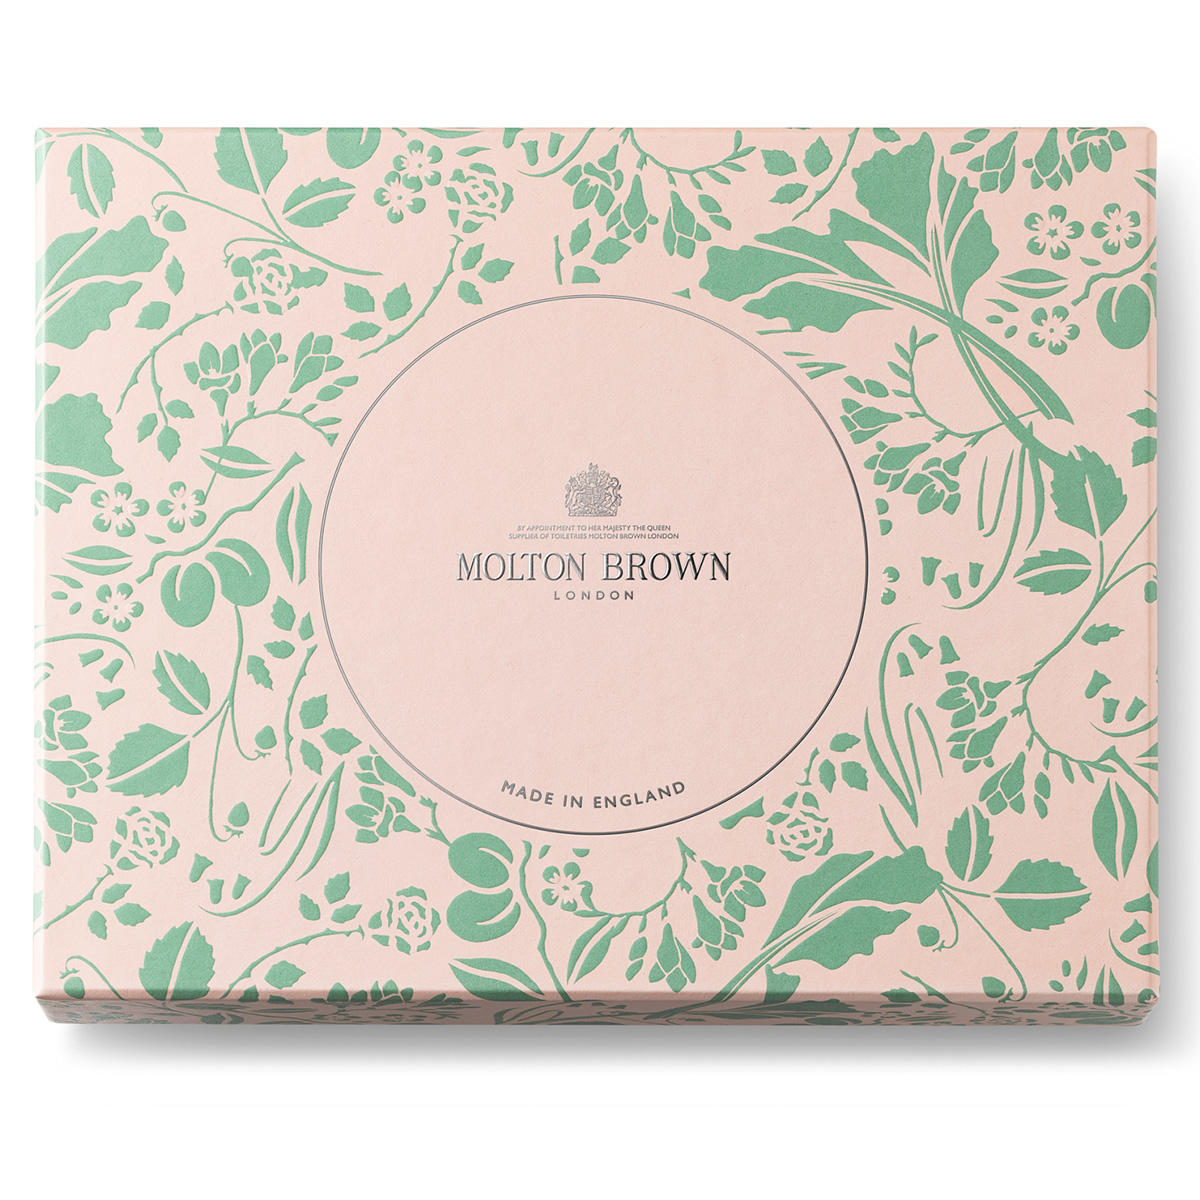 MOLTON BROWN Floral & Fruity Body Care Gift Set 3 x 300 ml - 2